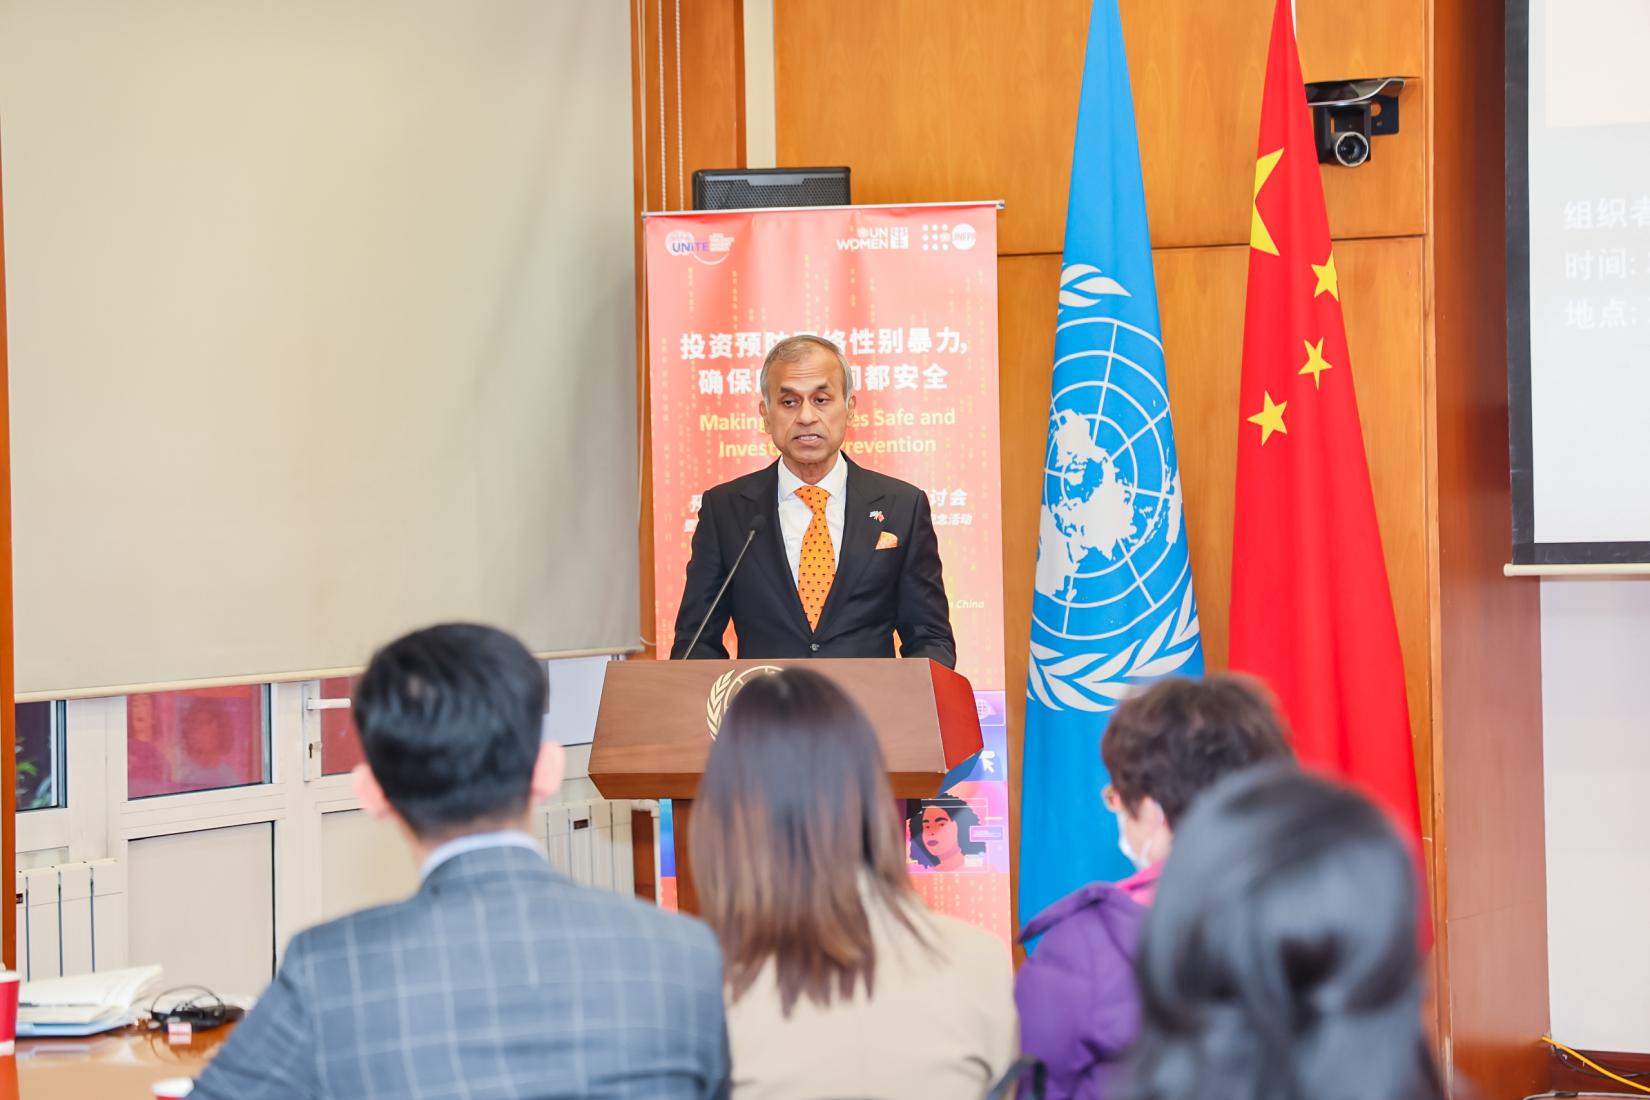 UN Resident Coordinator in China Siddharth Chatterjee at the Seminar on Technology-facilitated Gender-based Violence and Commemoration of 16-days of Activism of Ending Violence against Women and Girls in China